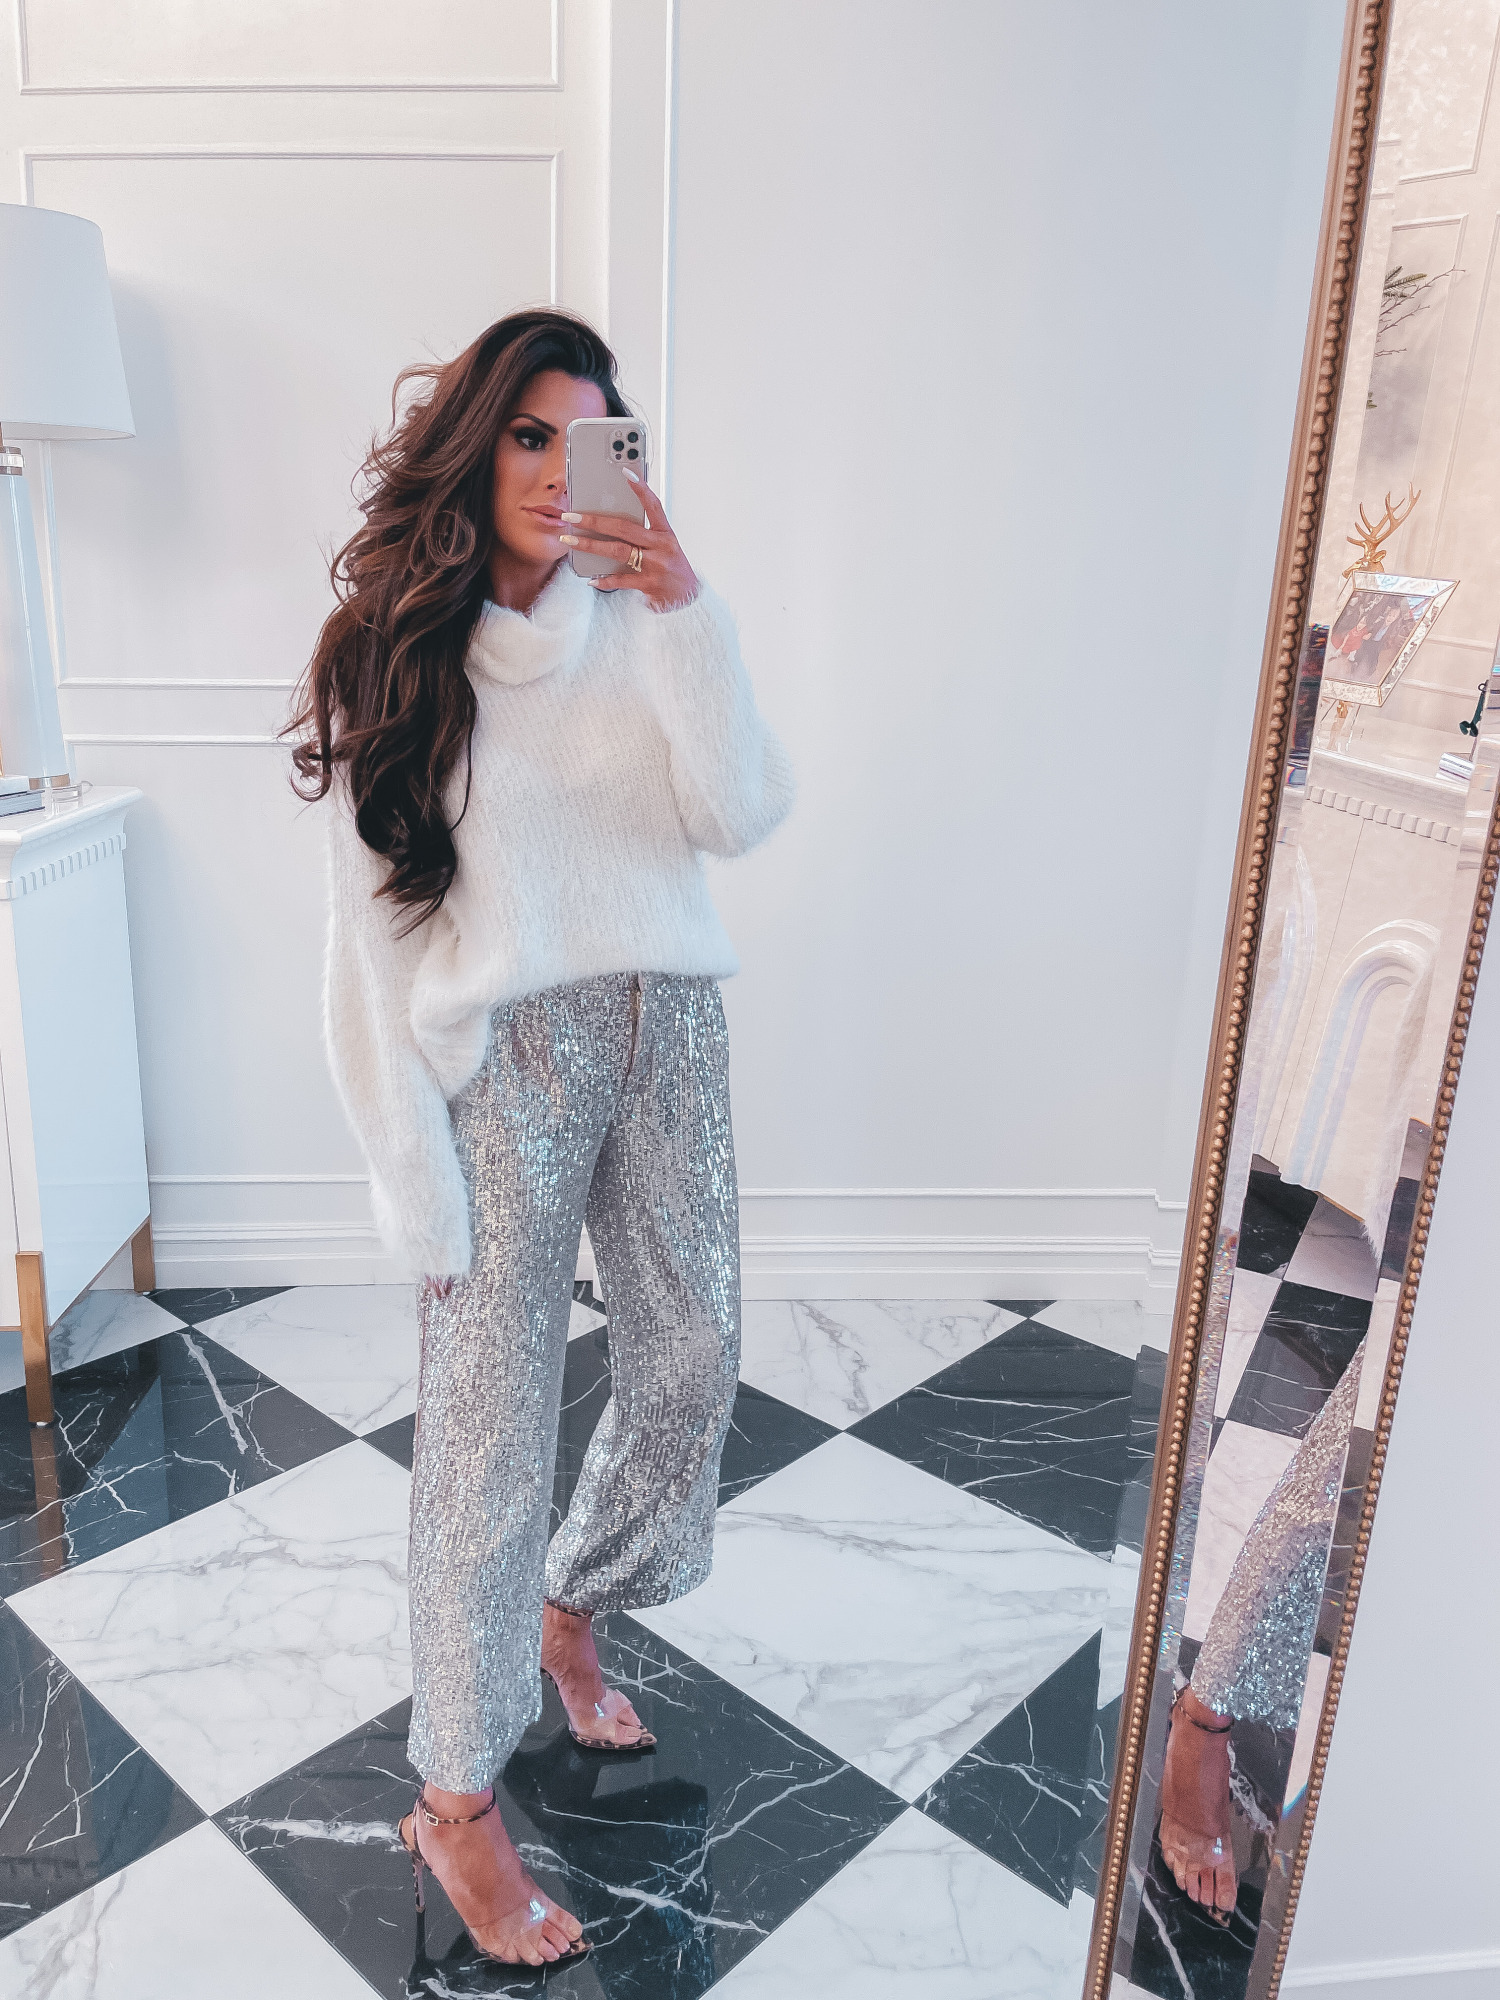 sequin pants, best black friday cyber monday sales 2020, top black friday sales 2020, emily gemma16 | 2020 Black Friday Deals by popular US life and style blog, The Sweetest Thing: image of Emily Gemma wearing a white eyelash turtleneck sweater, sliver sequin pants, and stiletto clear strap sandals.  